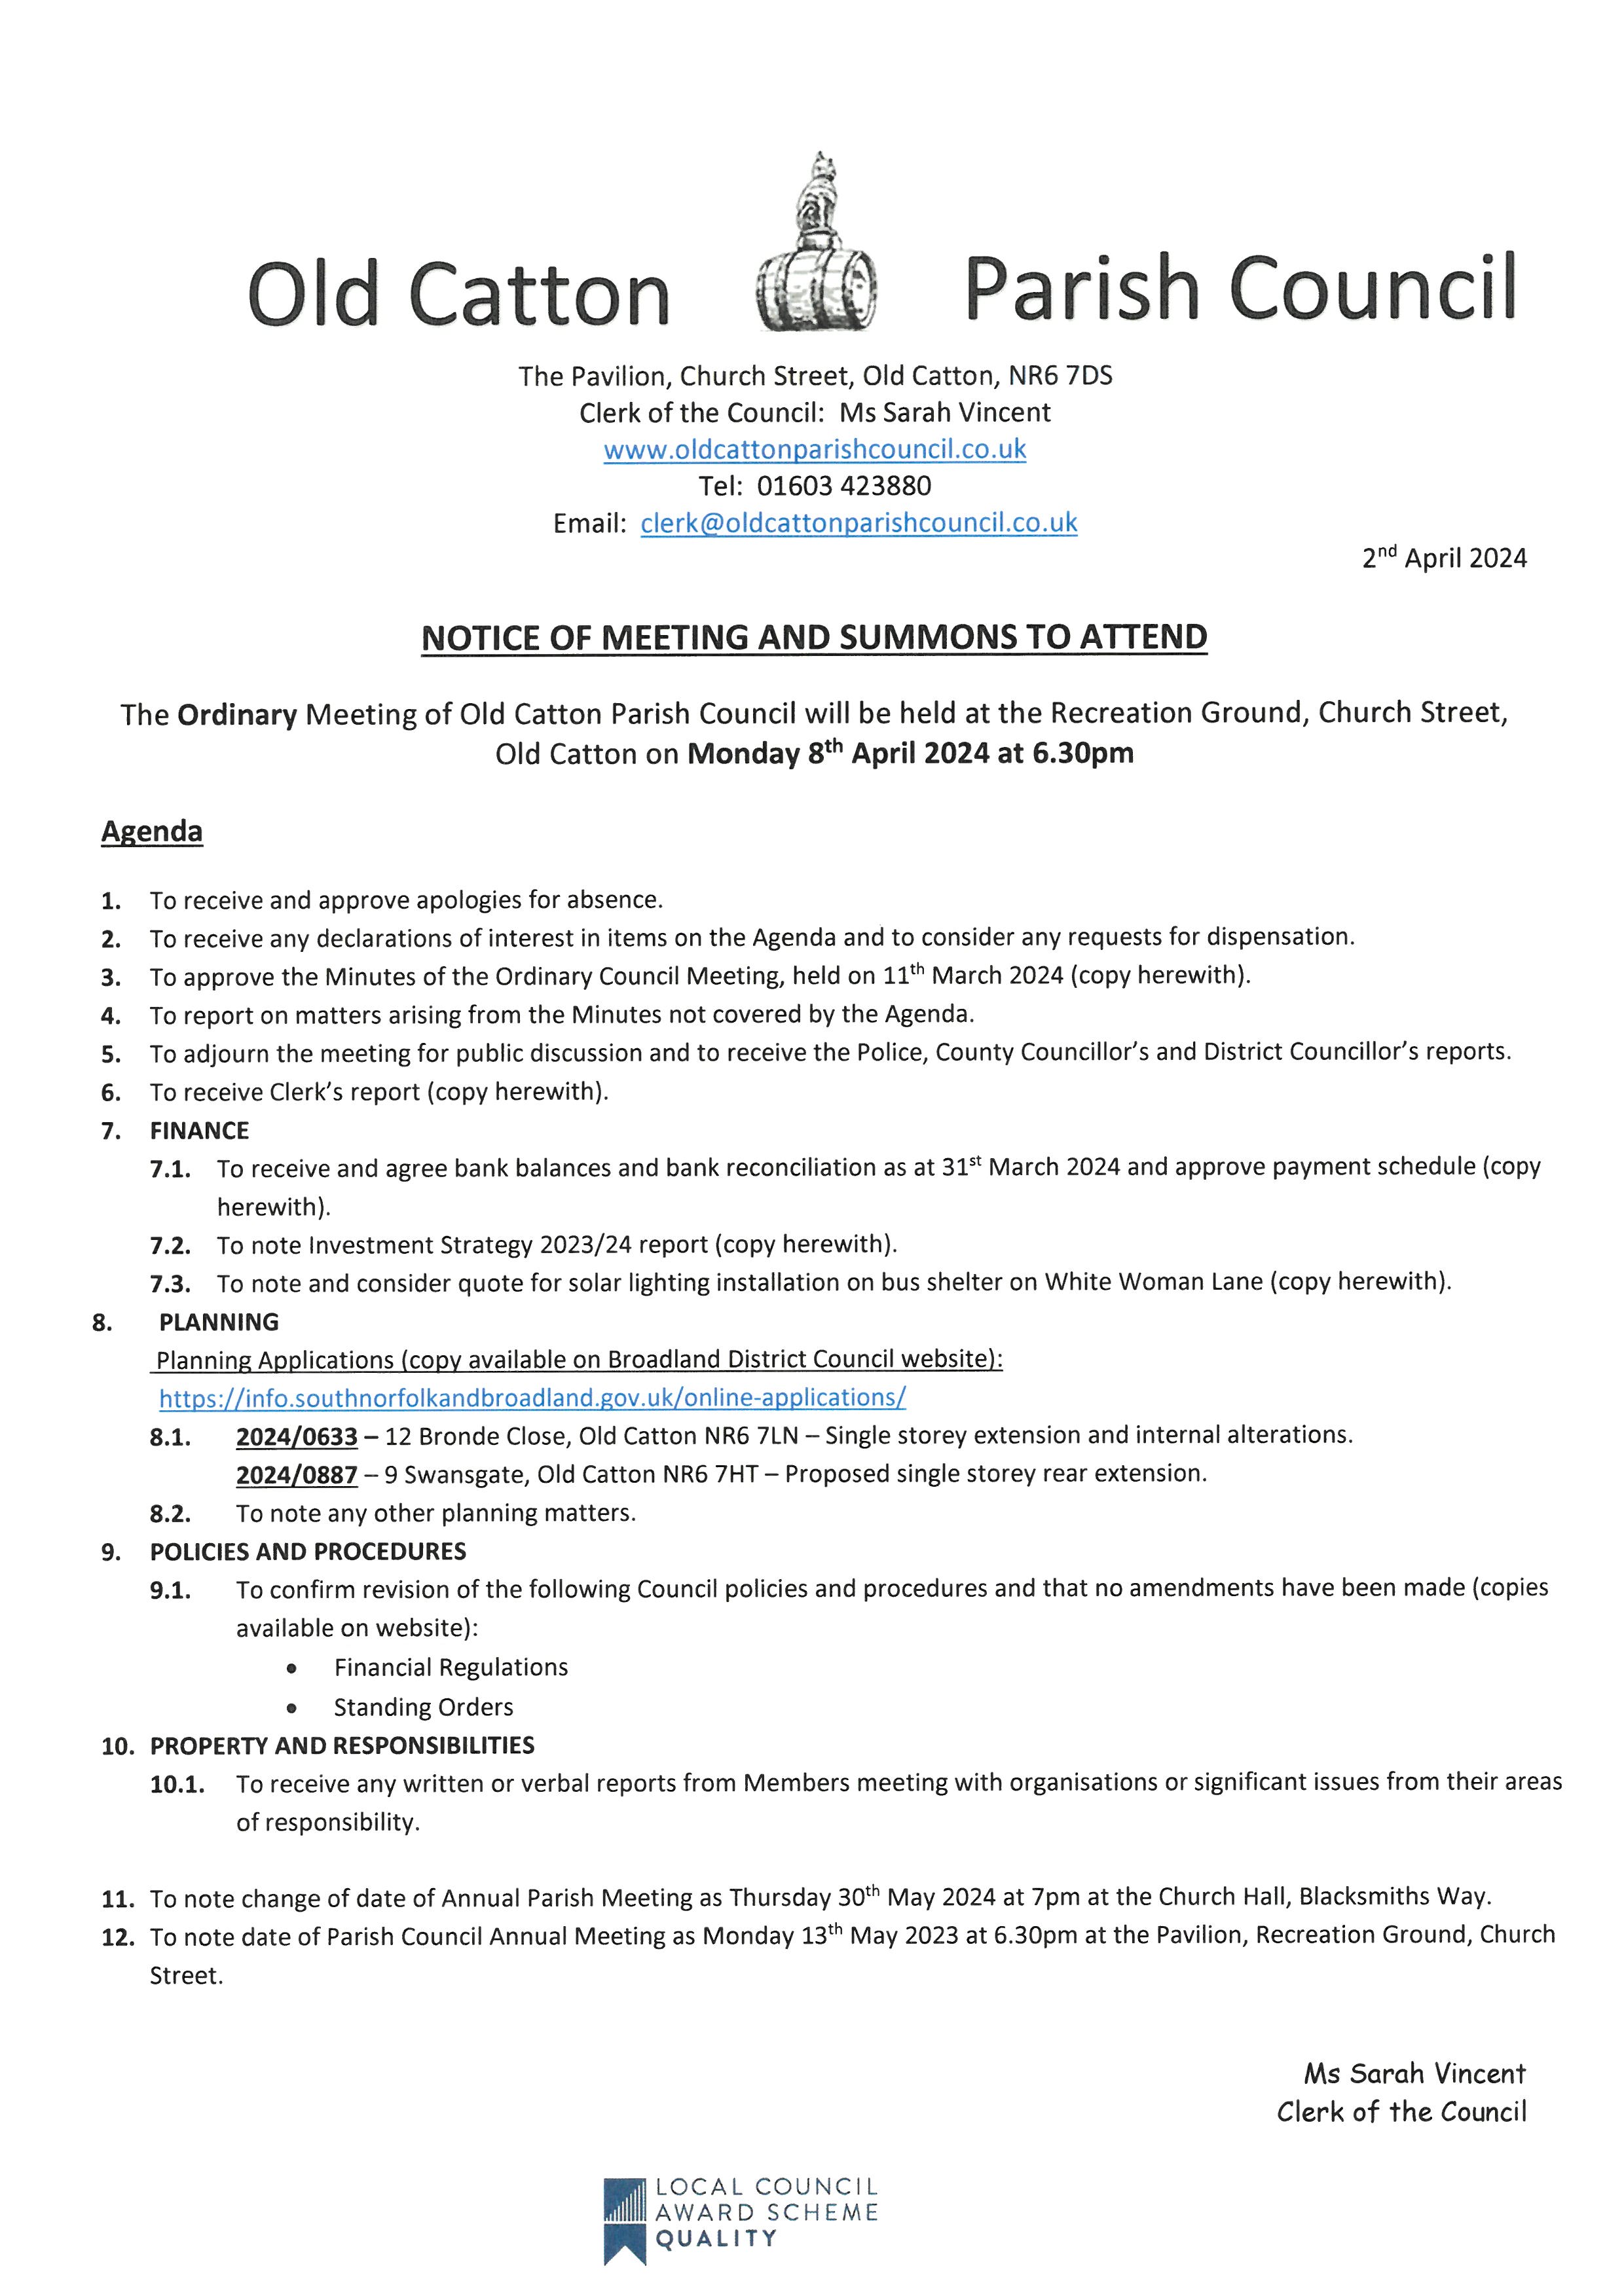 Ordinary Meeting of Old Catton Parish Council on Monday 8th April 2024